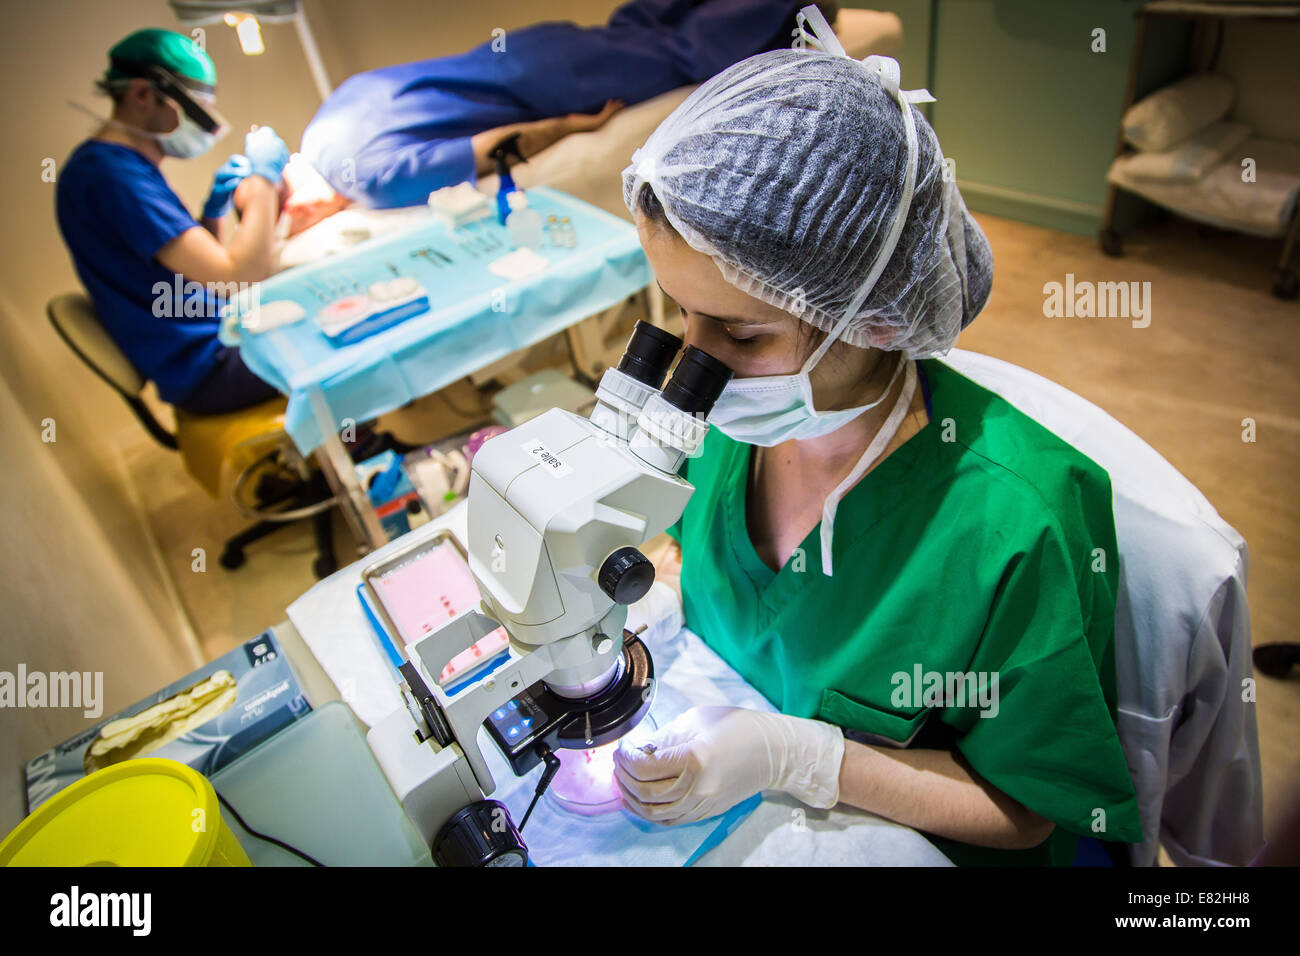 Micrografting hair follicle extraction, FUE Follicular Unit Extraction. Stock Photo